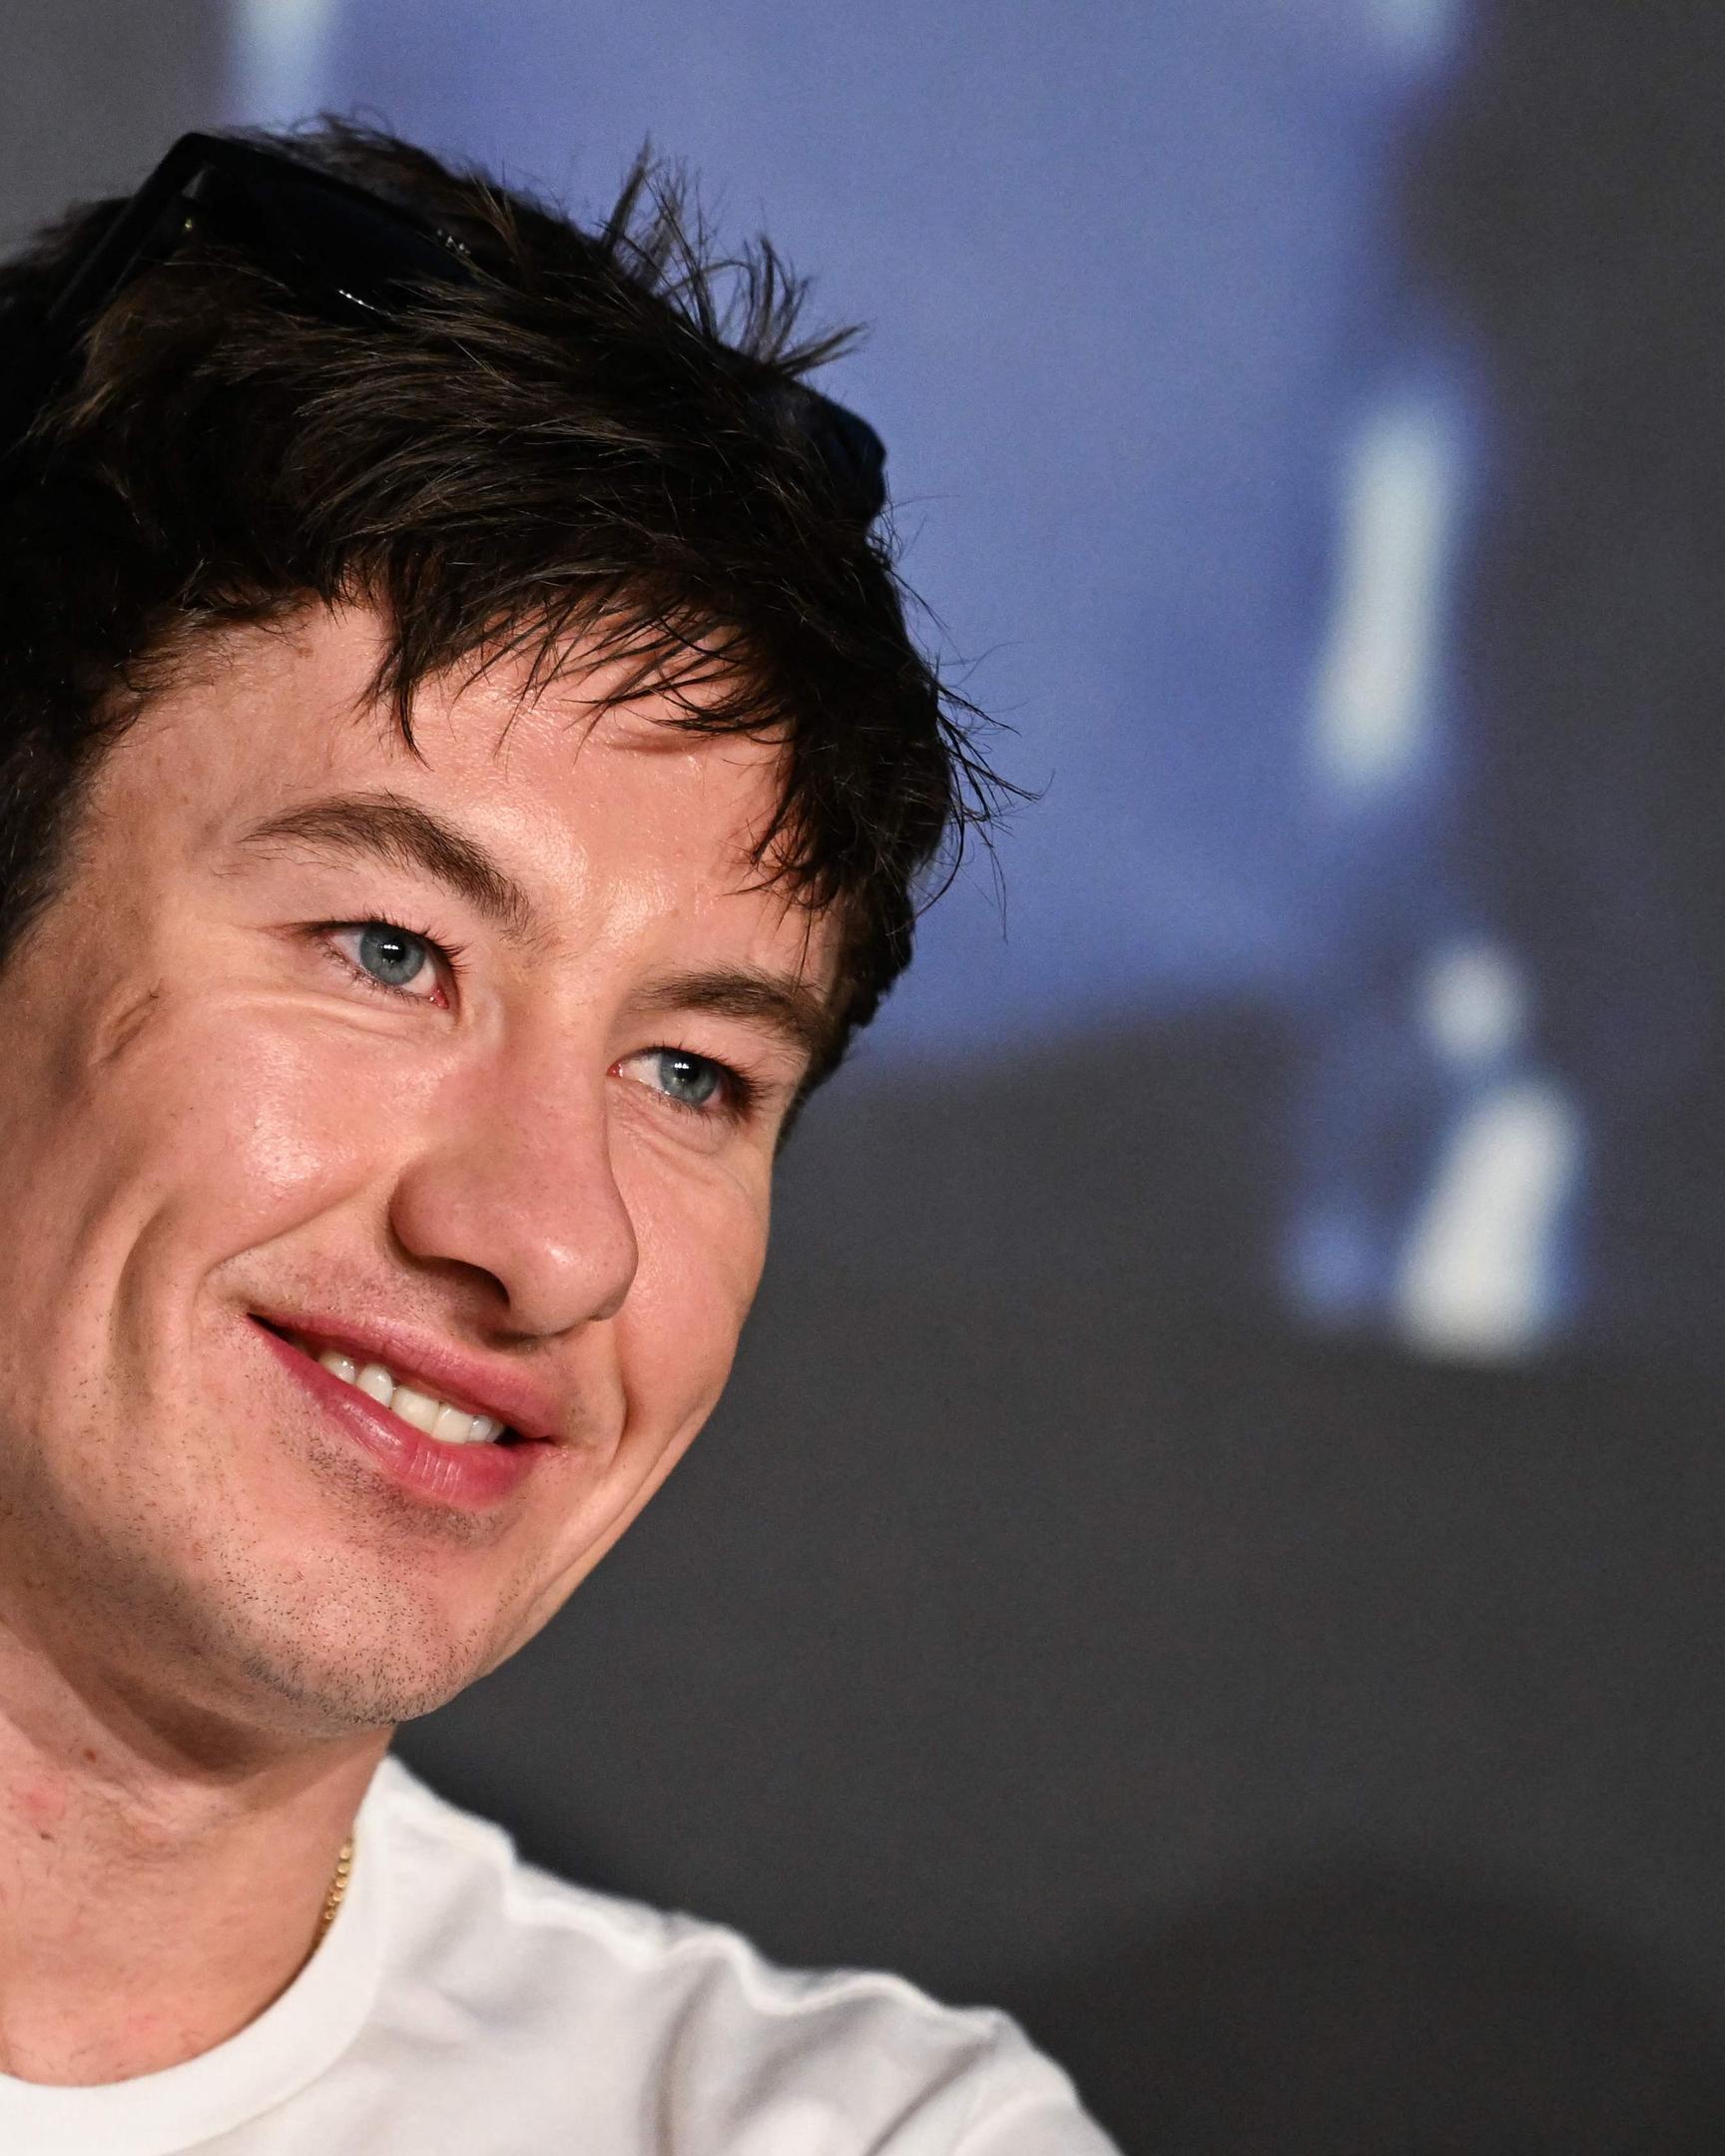 Irish actor Barry Keoghan looks on as he attends a press conference for the film "Bird" during the 77th edition of the Cannes Film Festival in Cannes, southern France, on May 17, 2024. (Photo by Zoulerah NORDDINE / AFP)